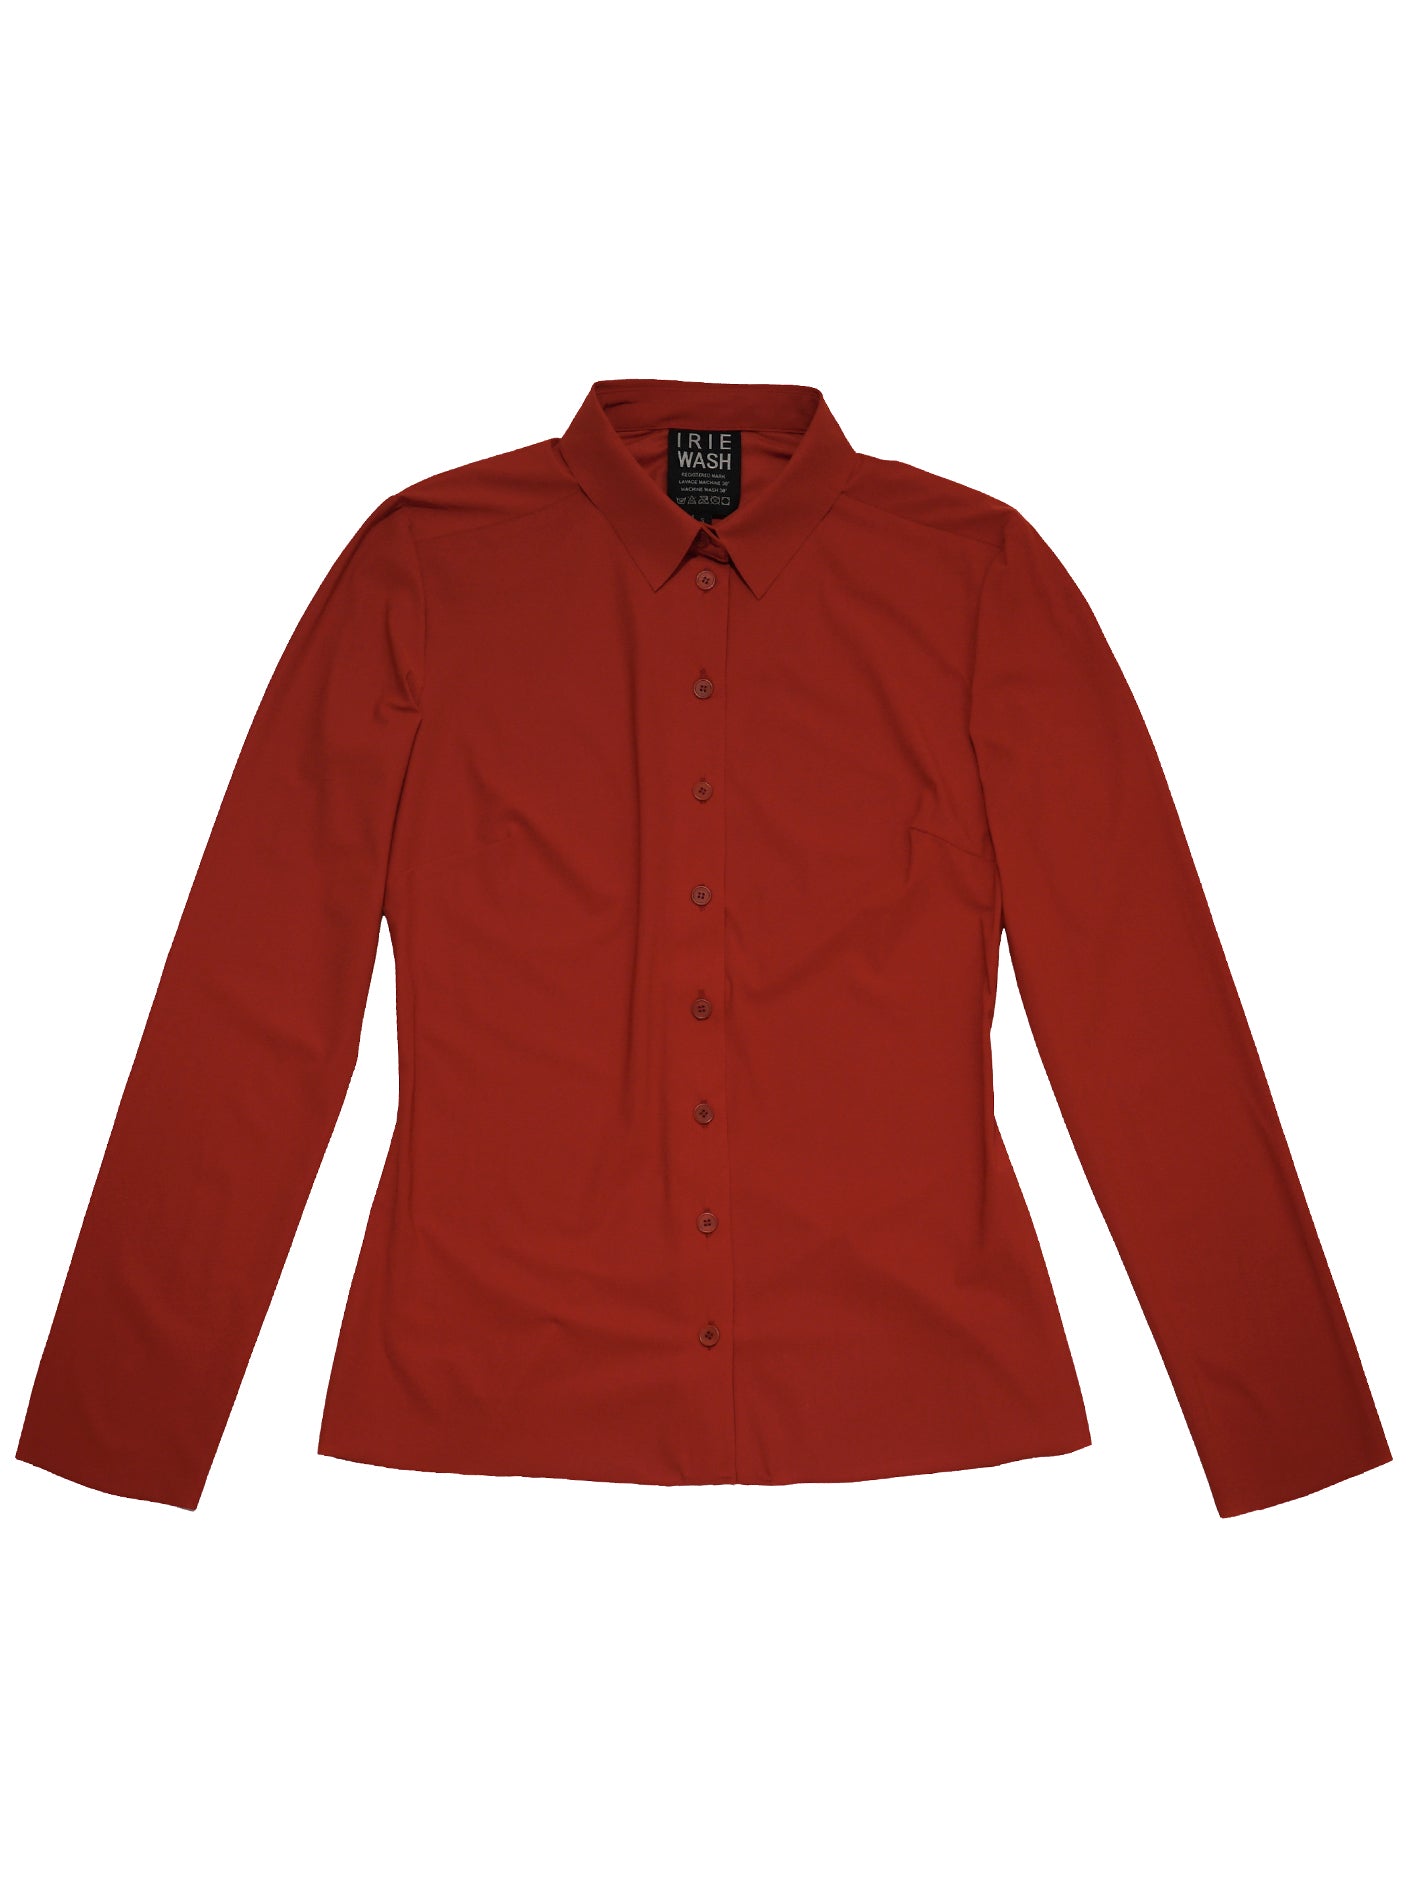 CLASSIC SHIRT, Red